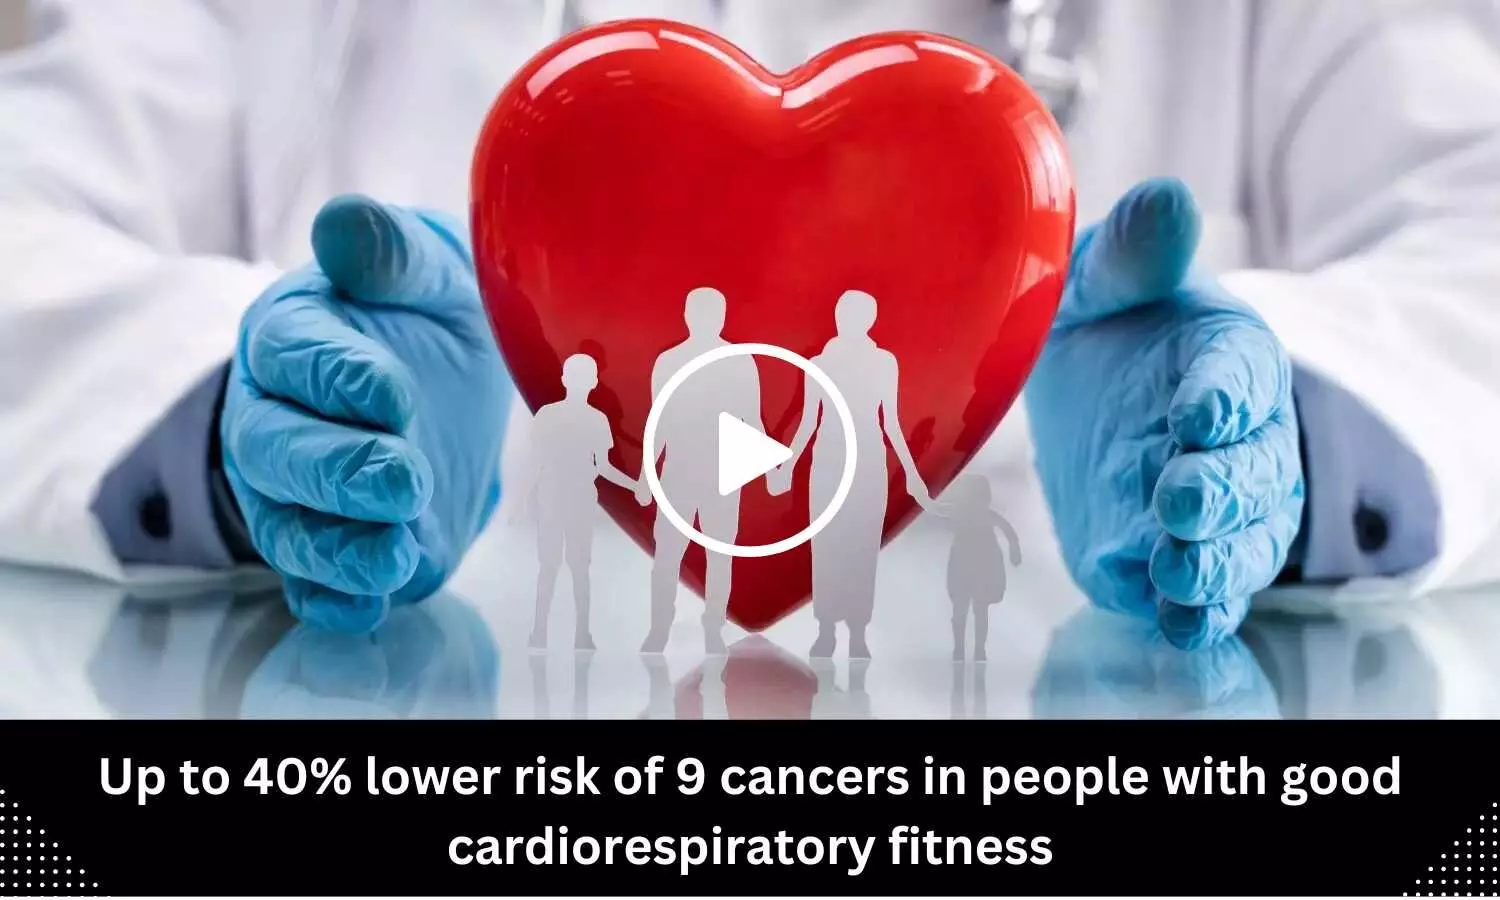 Up to 40% lower risk of 9 cancers in people with good cardiorespiratory fitness